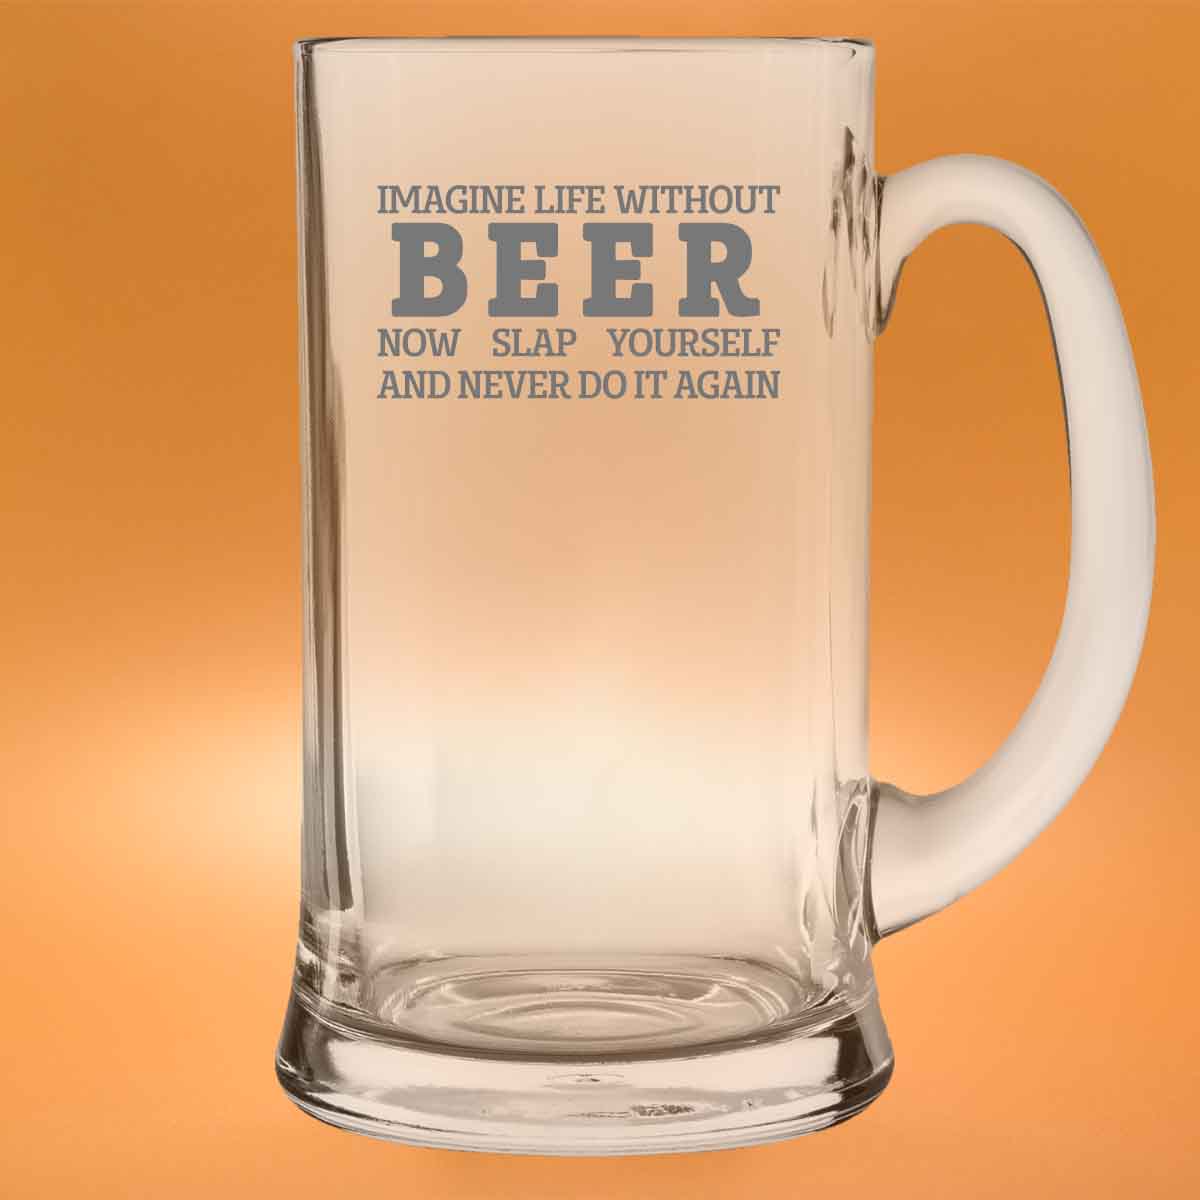 Without Beer - Beer glass